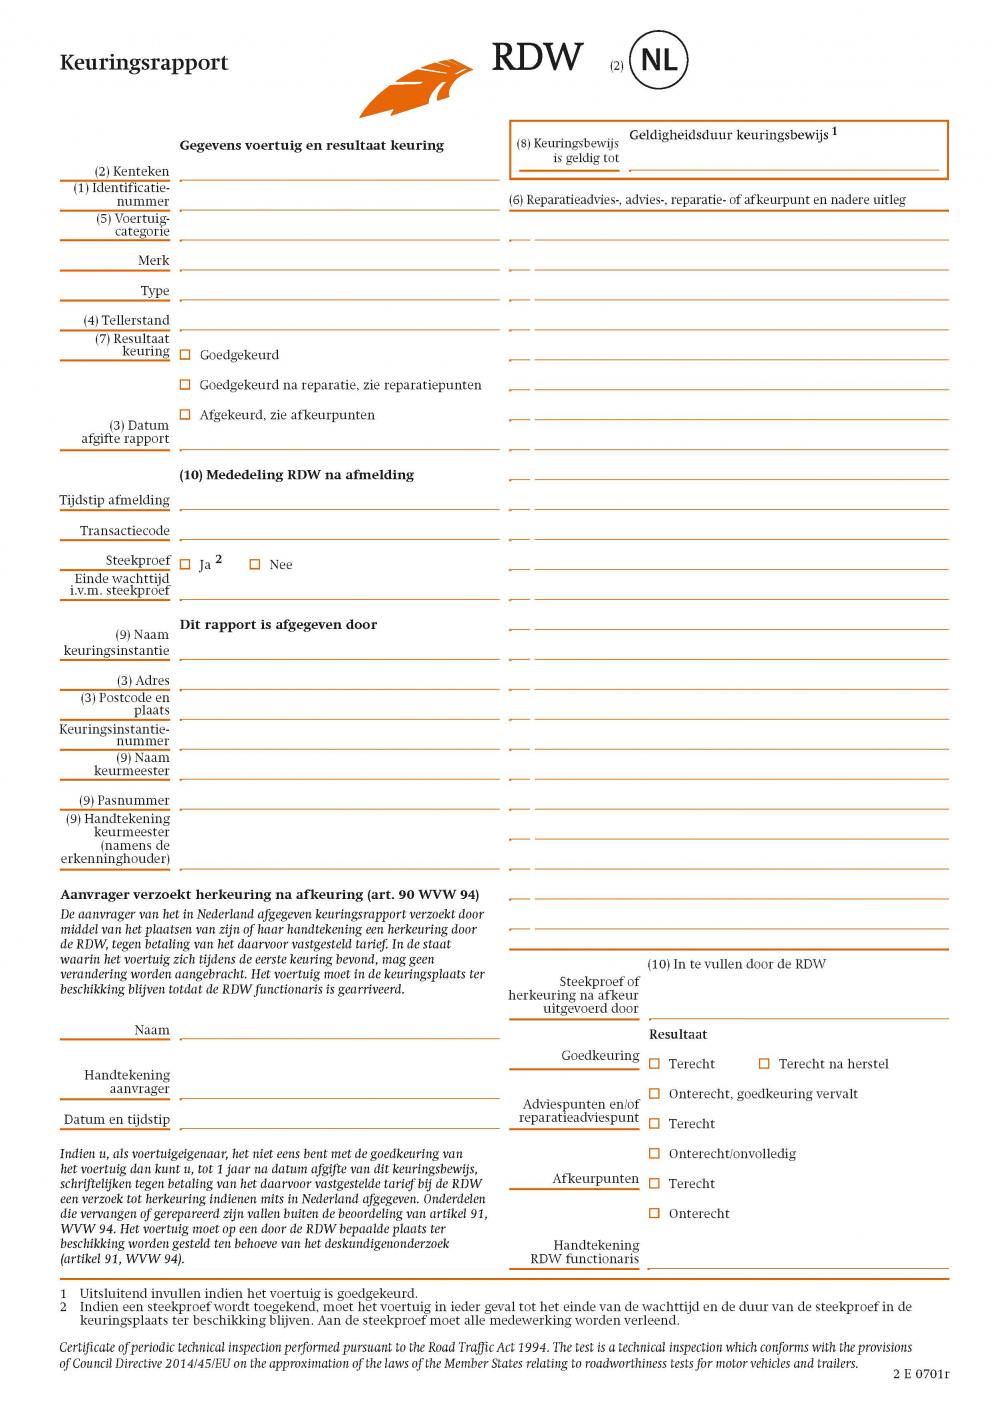 Roadworthiness Certificate template in the Netherlands